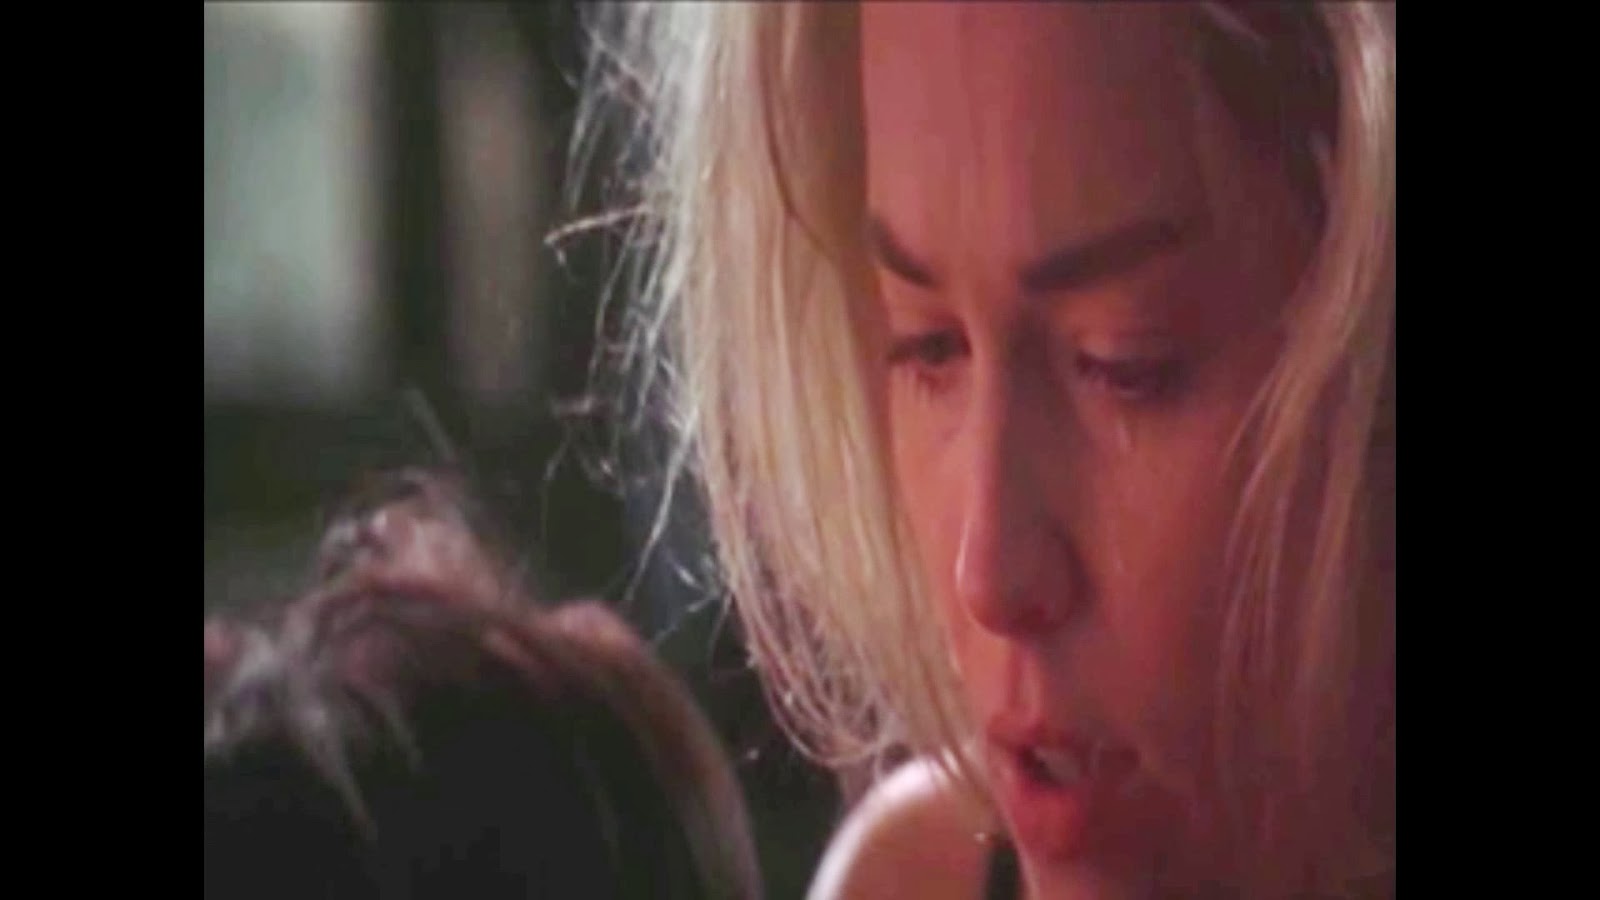 Hollywood Sexy Actress Video Clips Of Sharon Stone 56